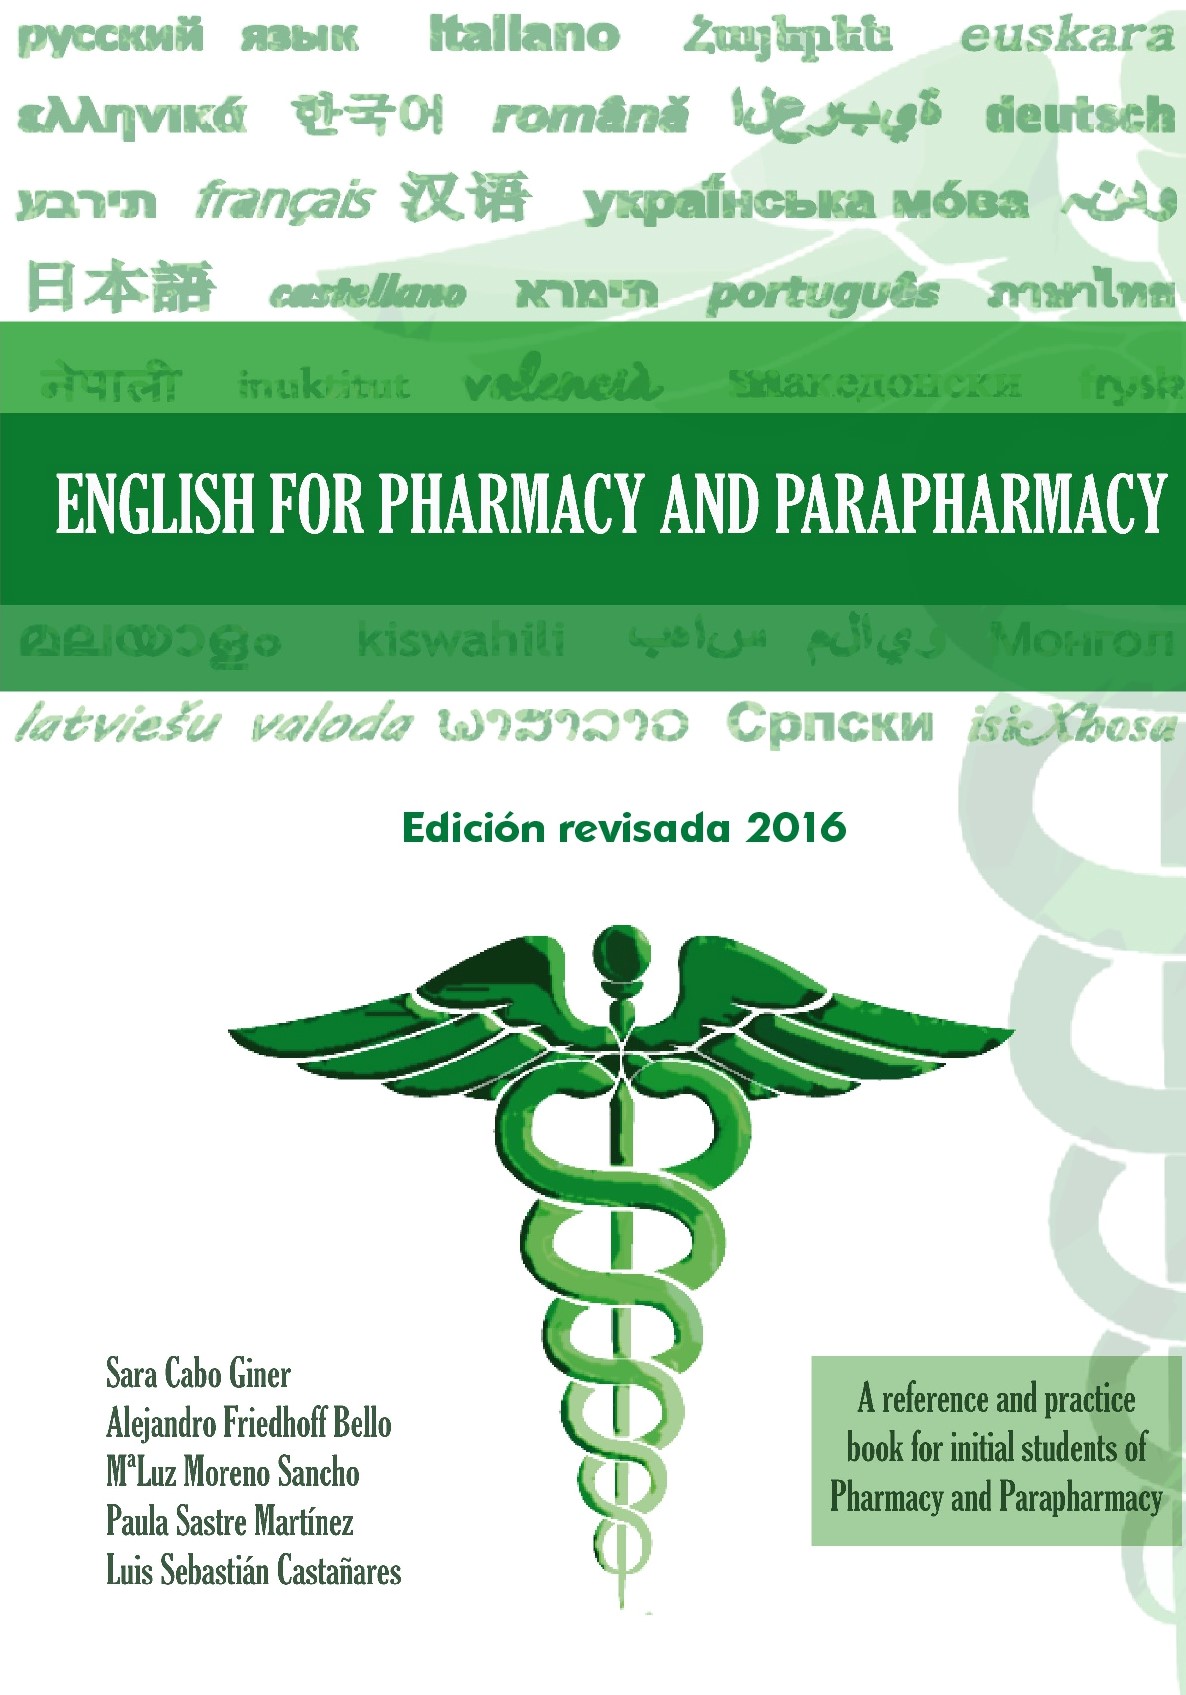 English for Pharmacy and parapharmacy